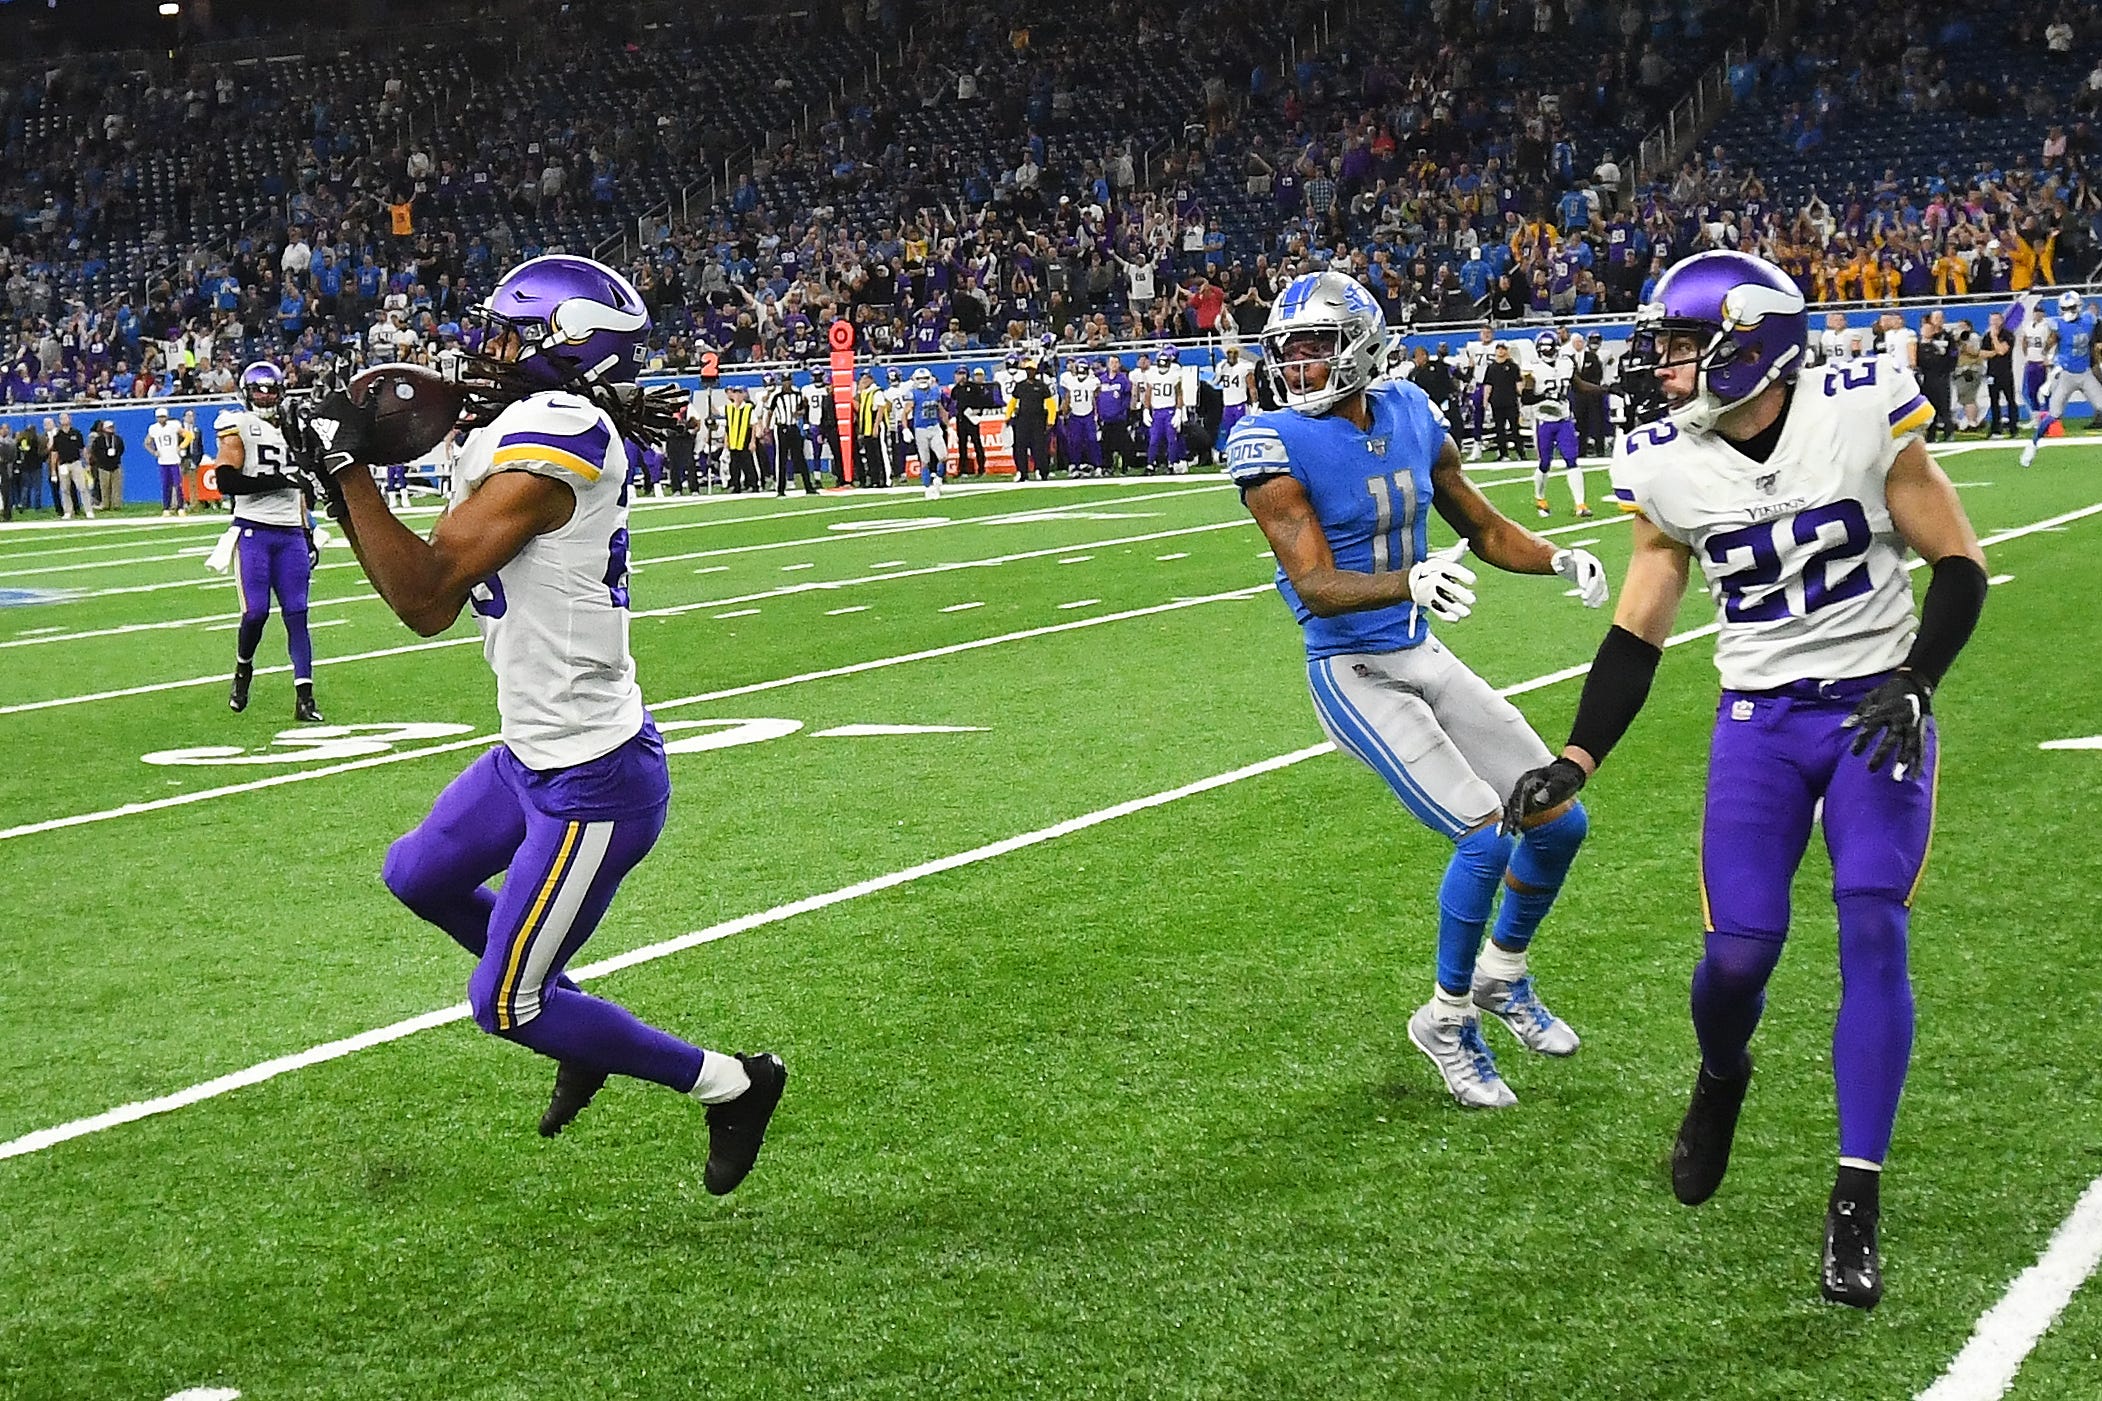 Vikings ' Trae Waynes intercepts a pass intended for Lions ' Marvin Jones late in the fourth quarter.